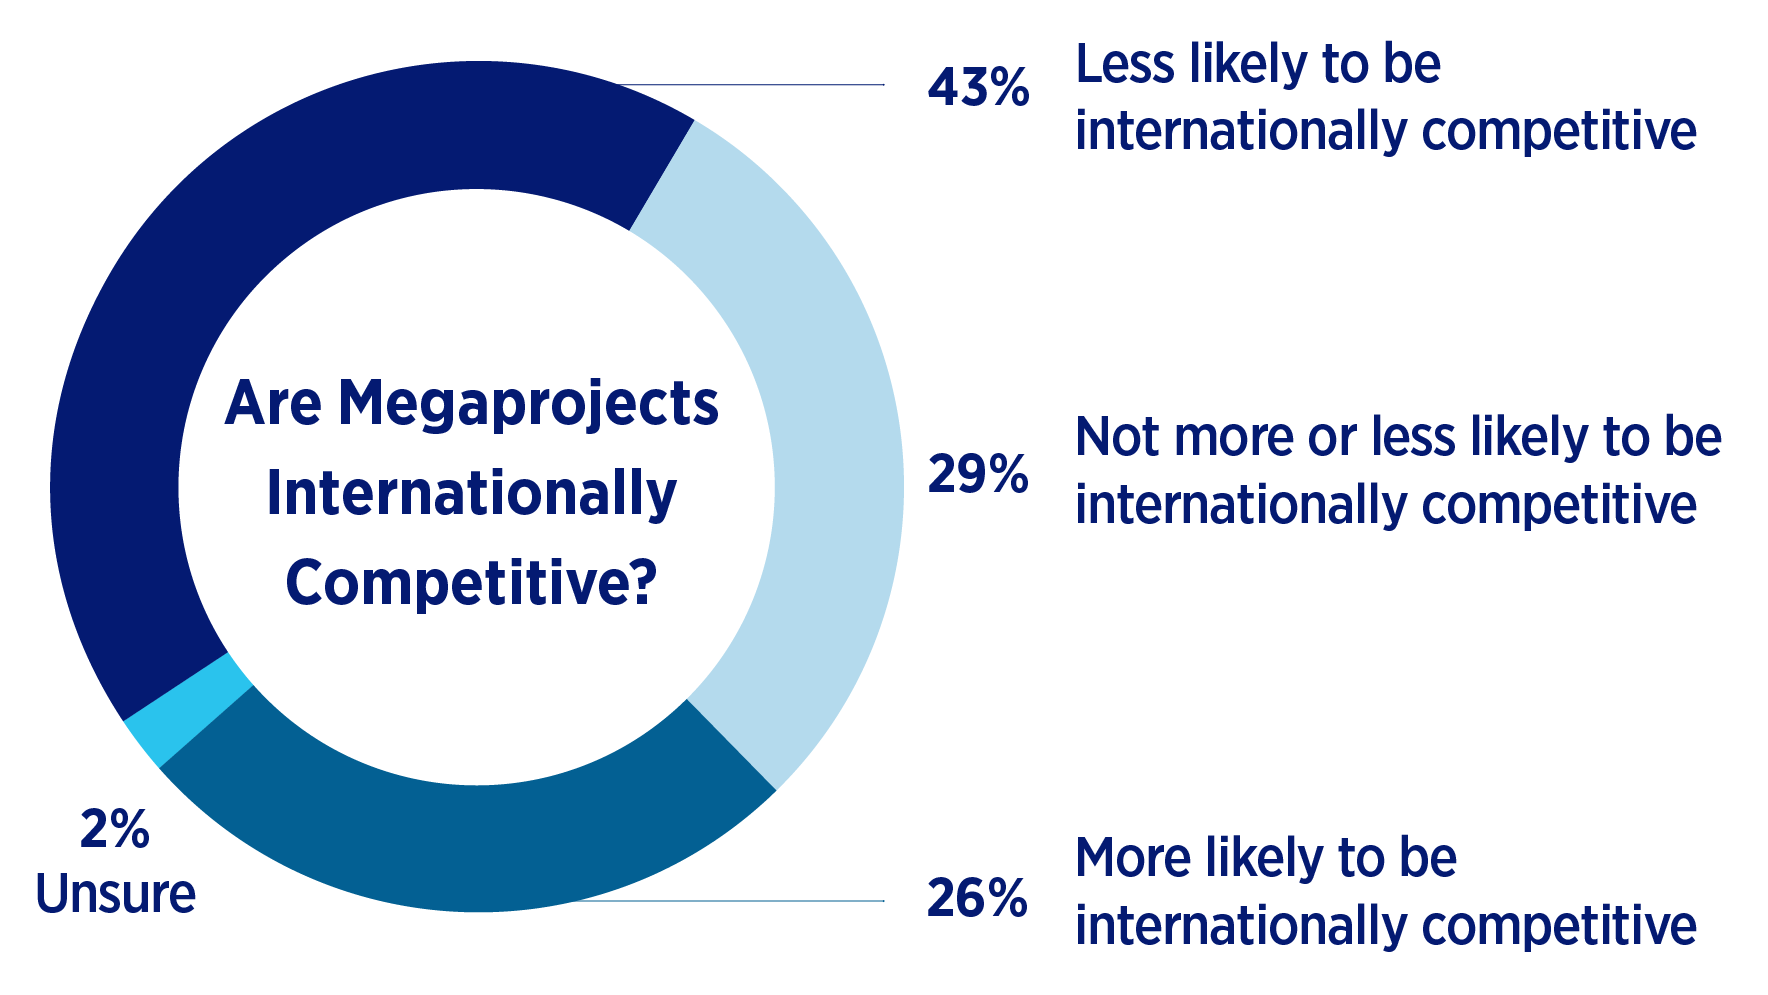 Chart showing 47% of consultants say megaprojects are less likely to be internationally competitive